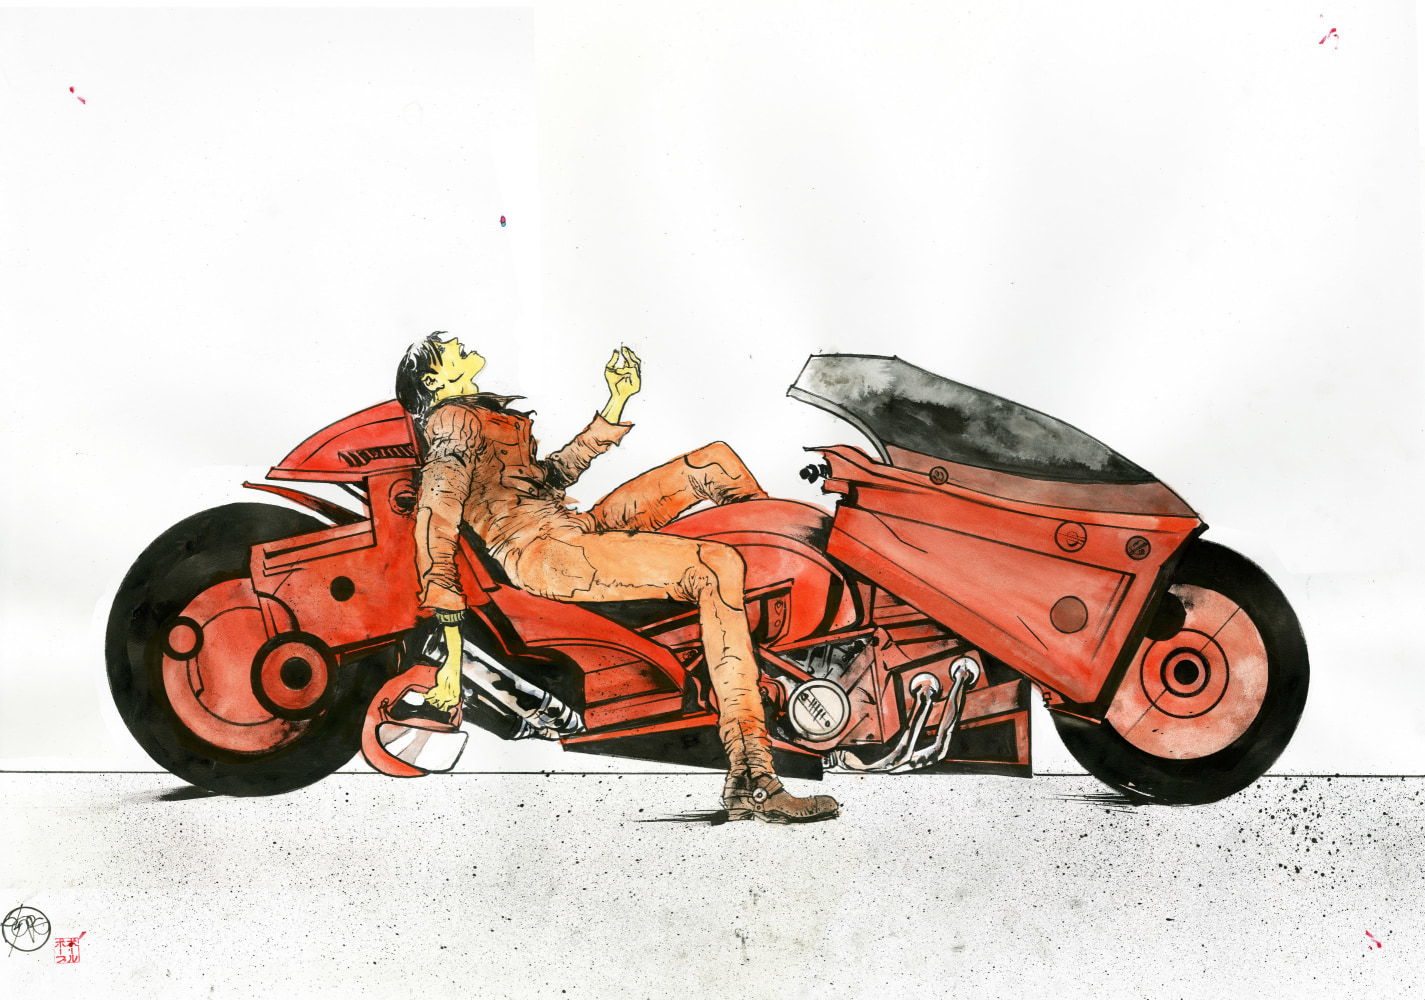 Paul Pope
A Tribute to Otomo from Paul Pope, 2021
Mixed media on paper
23 x 29 inches
$13,800 - Sold